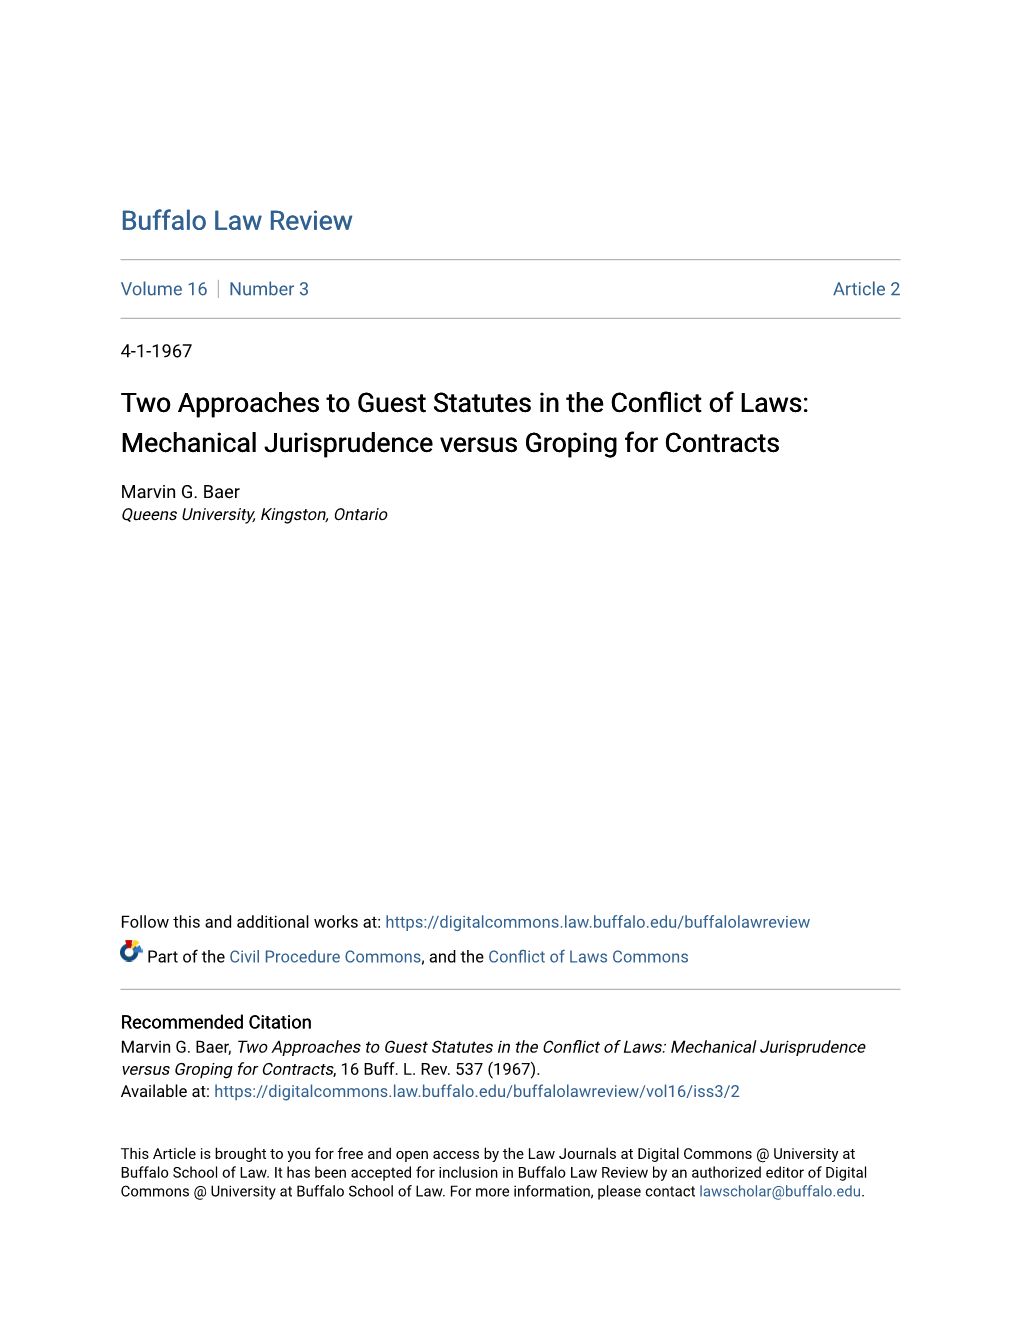 Two Approaches to Guest Statutes in the Conflict of Laws: Mechanical Jurisprudence Versus Groping for Contracts